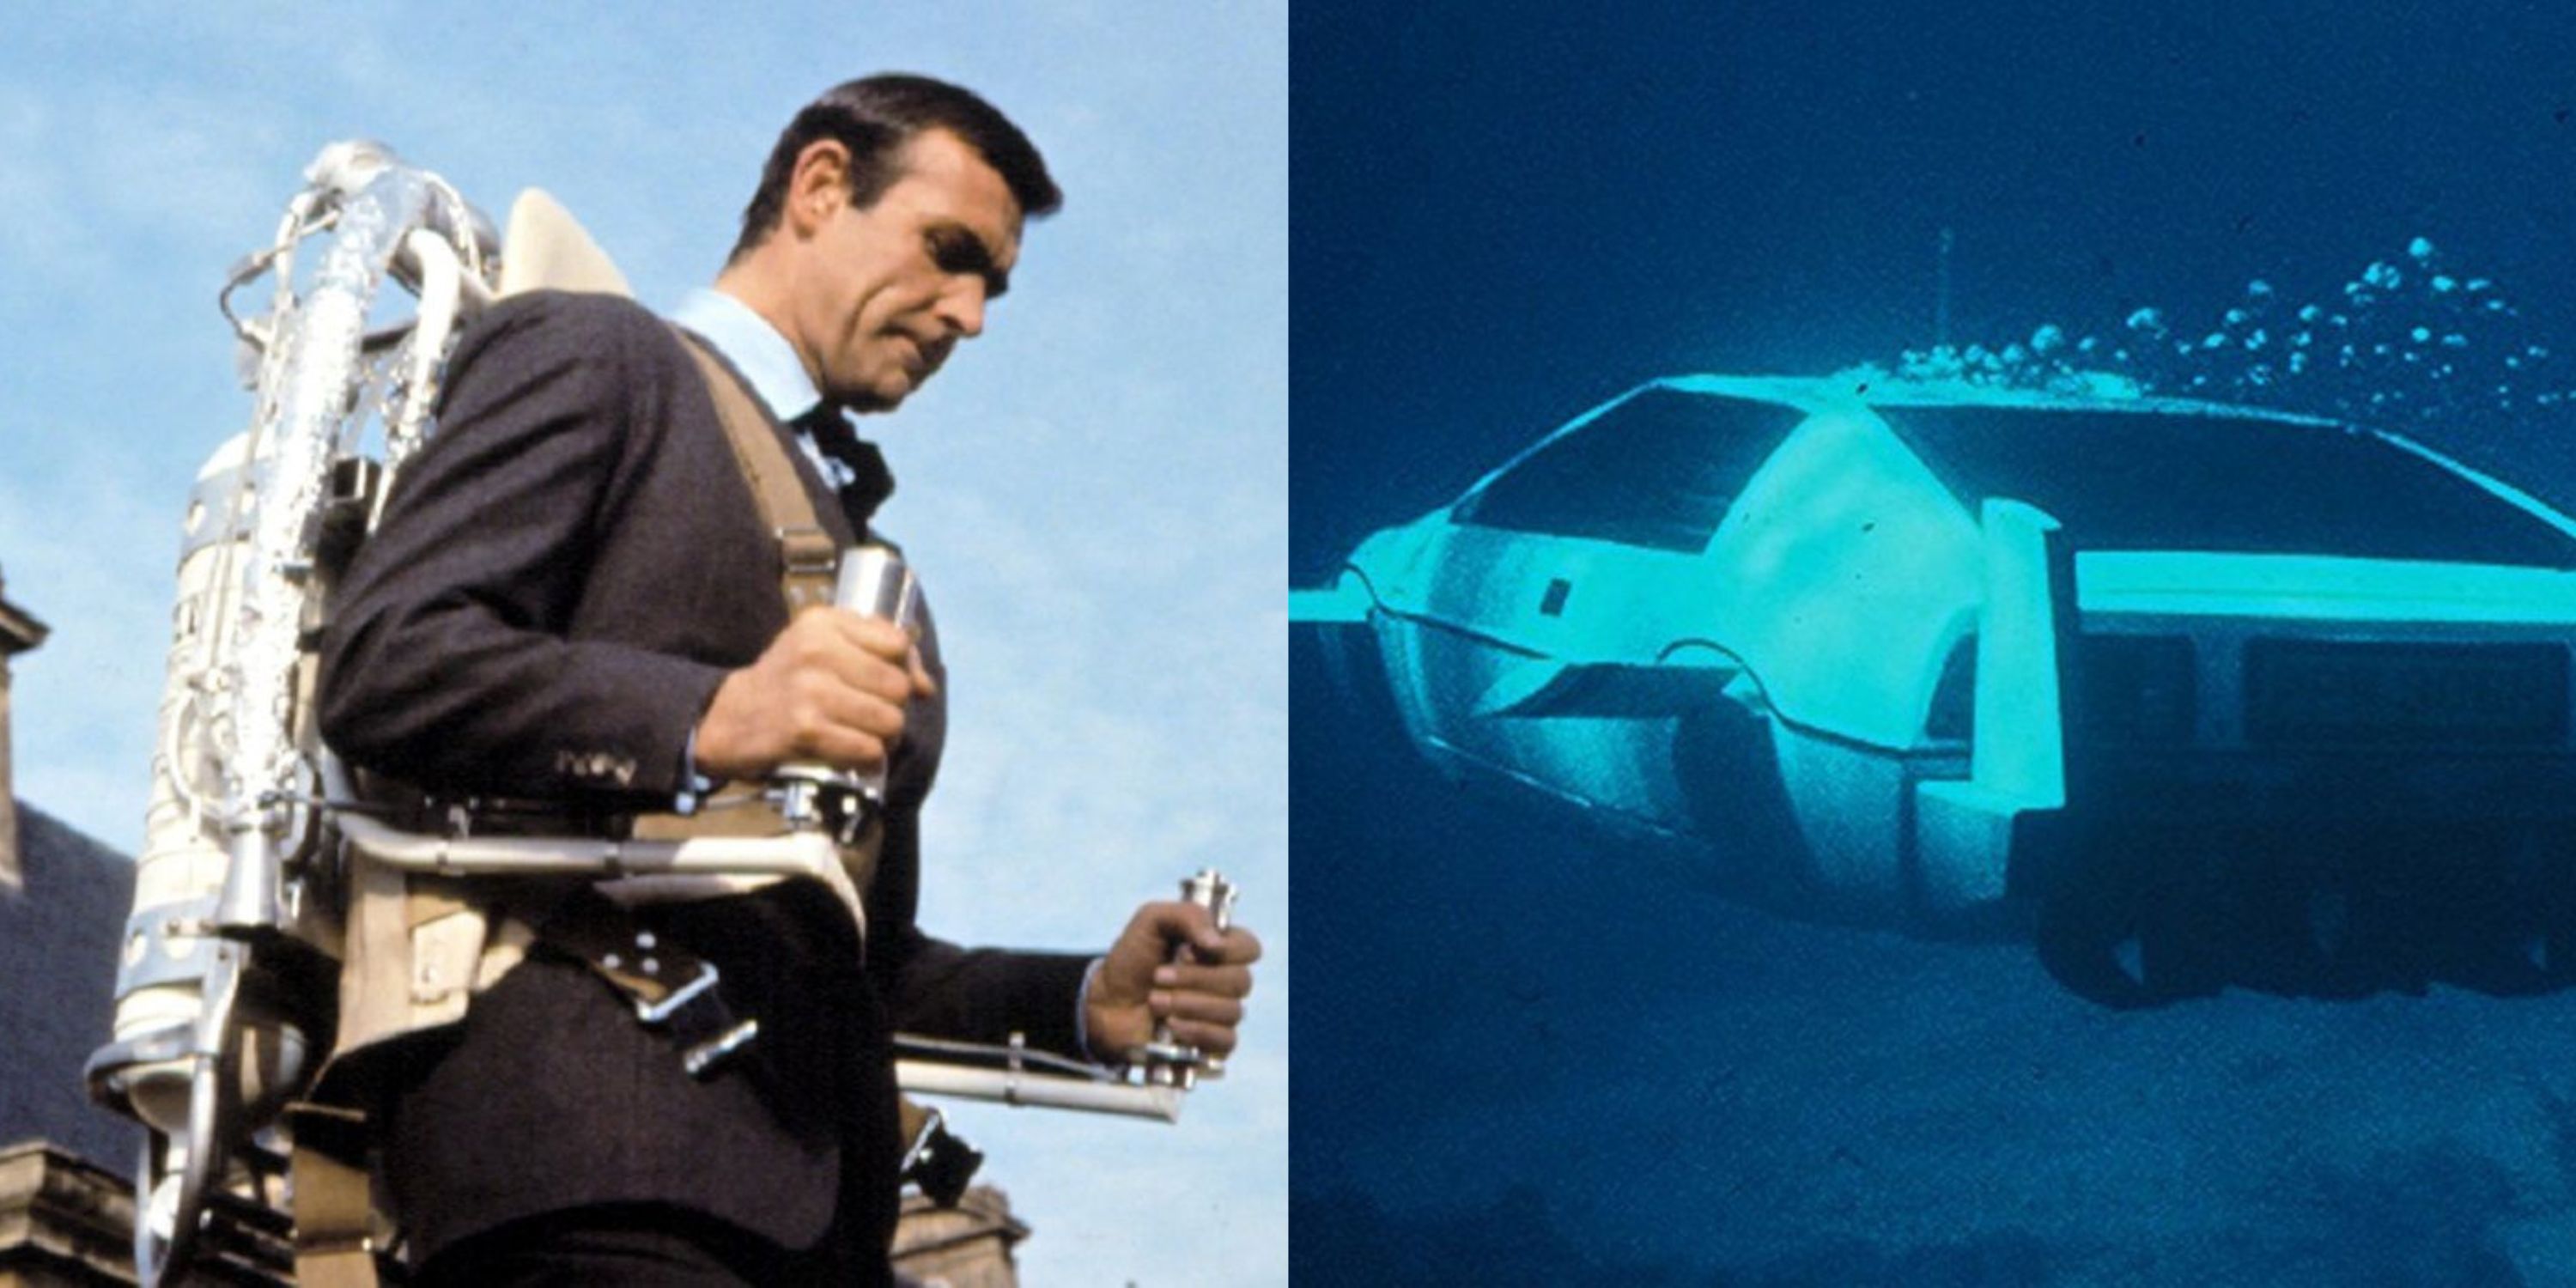 Featured image Sean Connery flying using a jetpack and a Lotus submarine car in James Bond movies